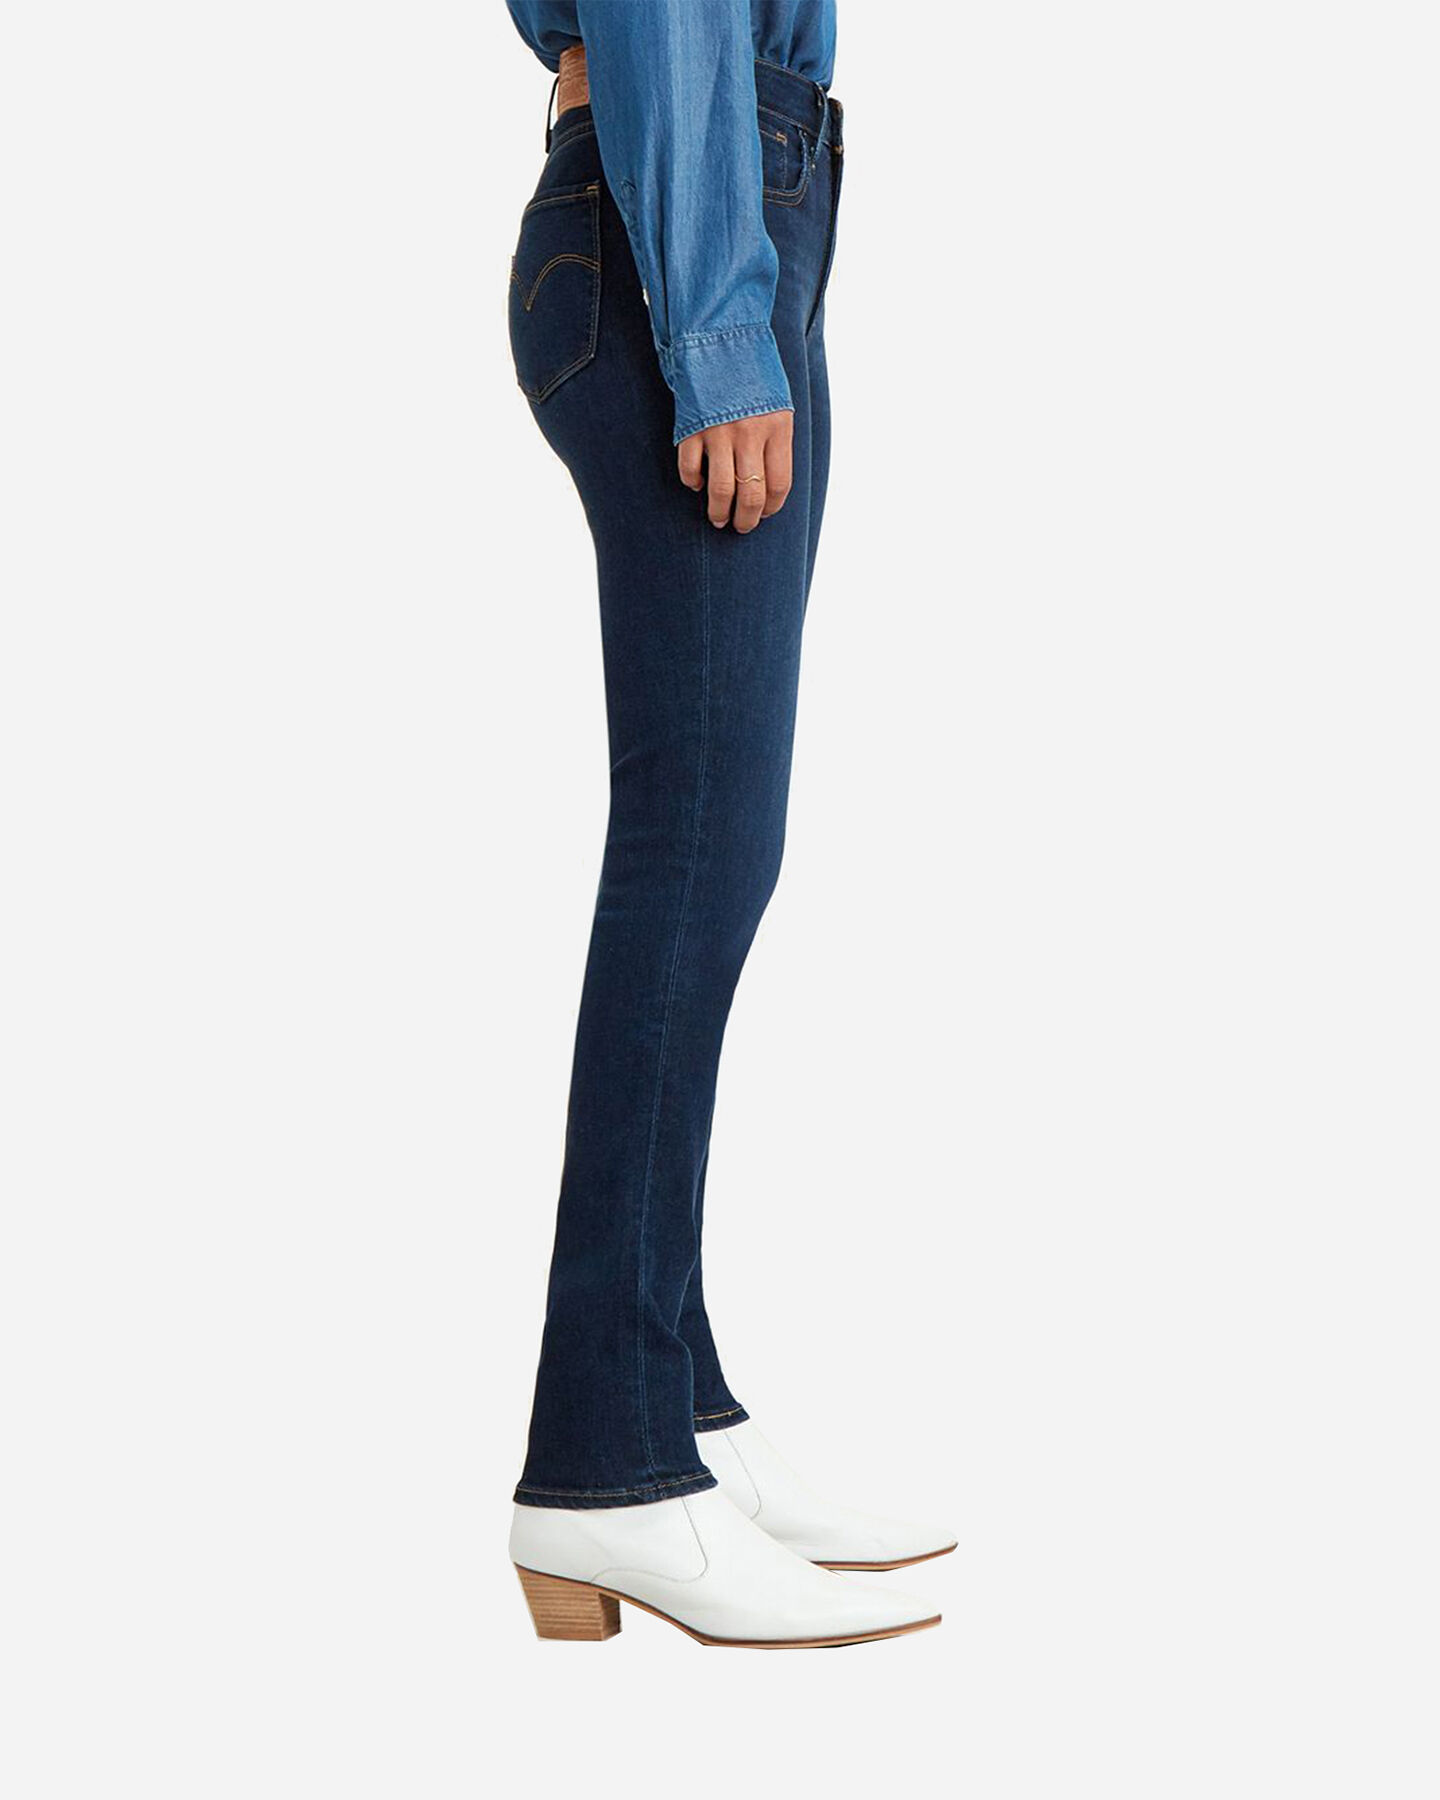  Jeans LEVI'S 721 HIGH RISE SKINNY  W S4097258|0362|26 scatto 1